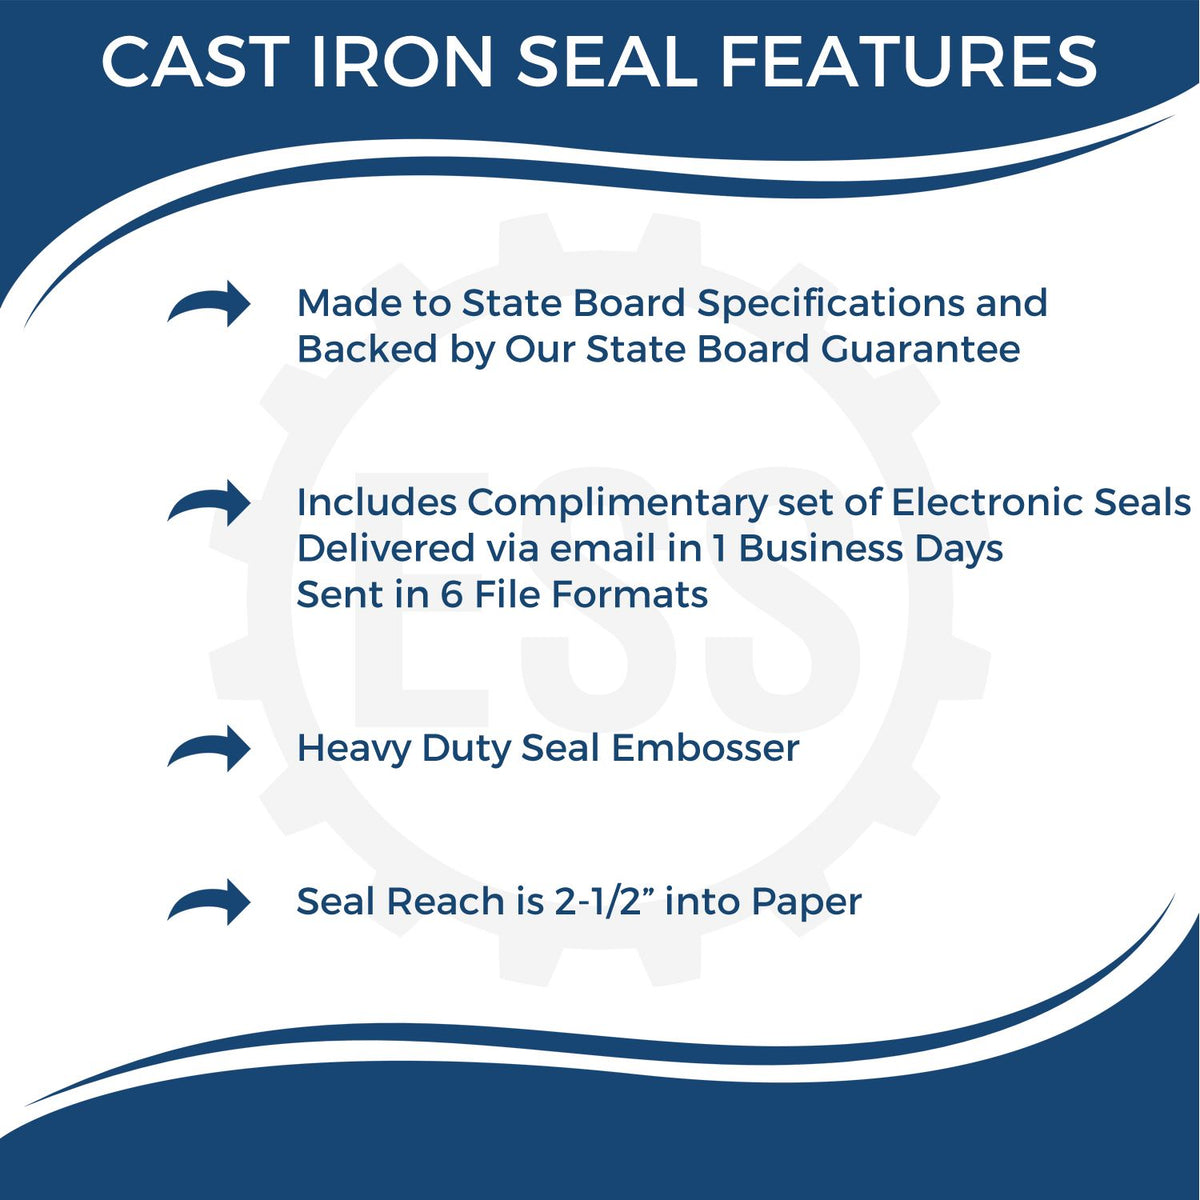 A picture of an infographic highlighting the selling points for the Heavy Duty Cast Iron Nevada Land Surveyor Seal Embosser